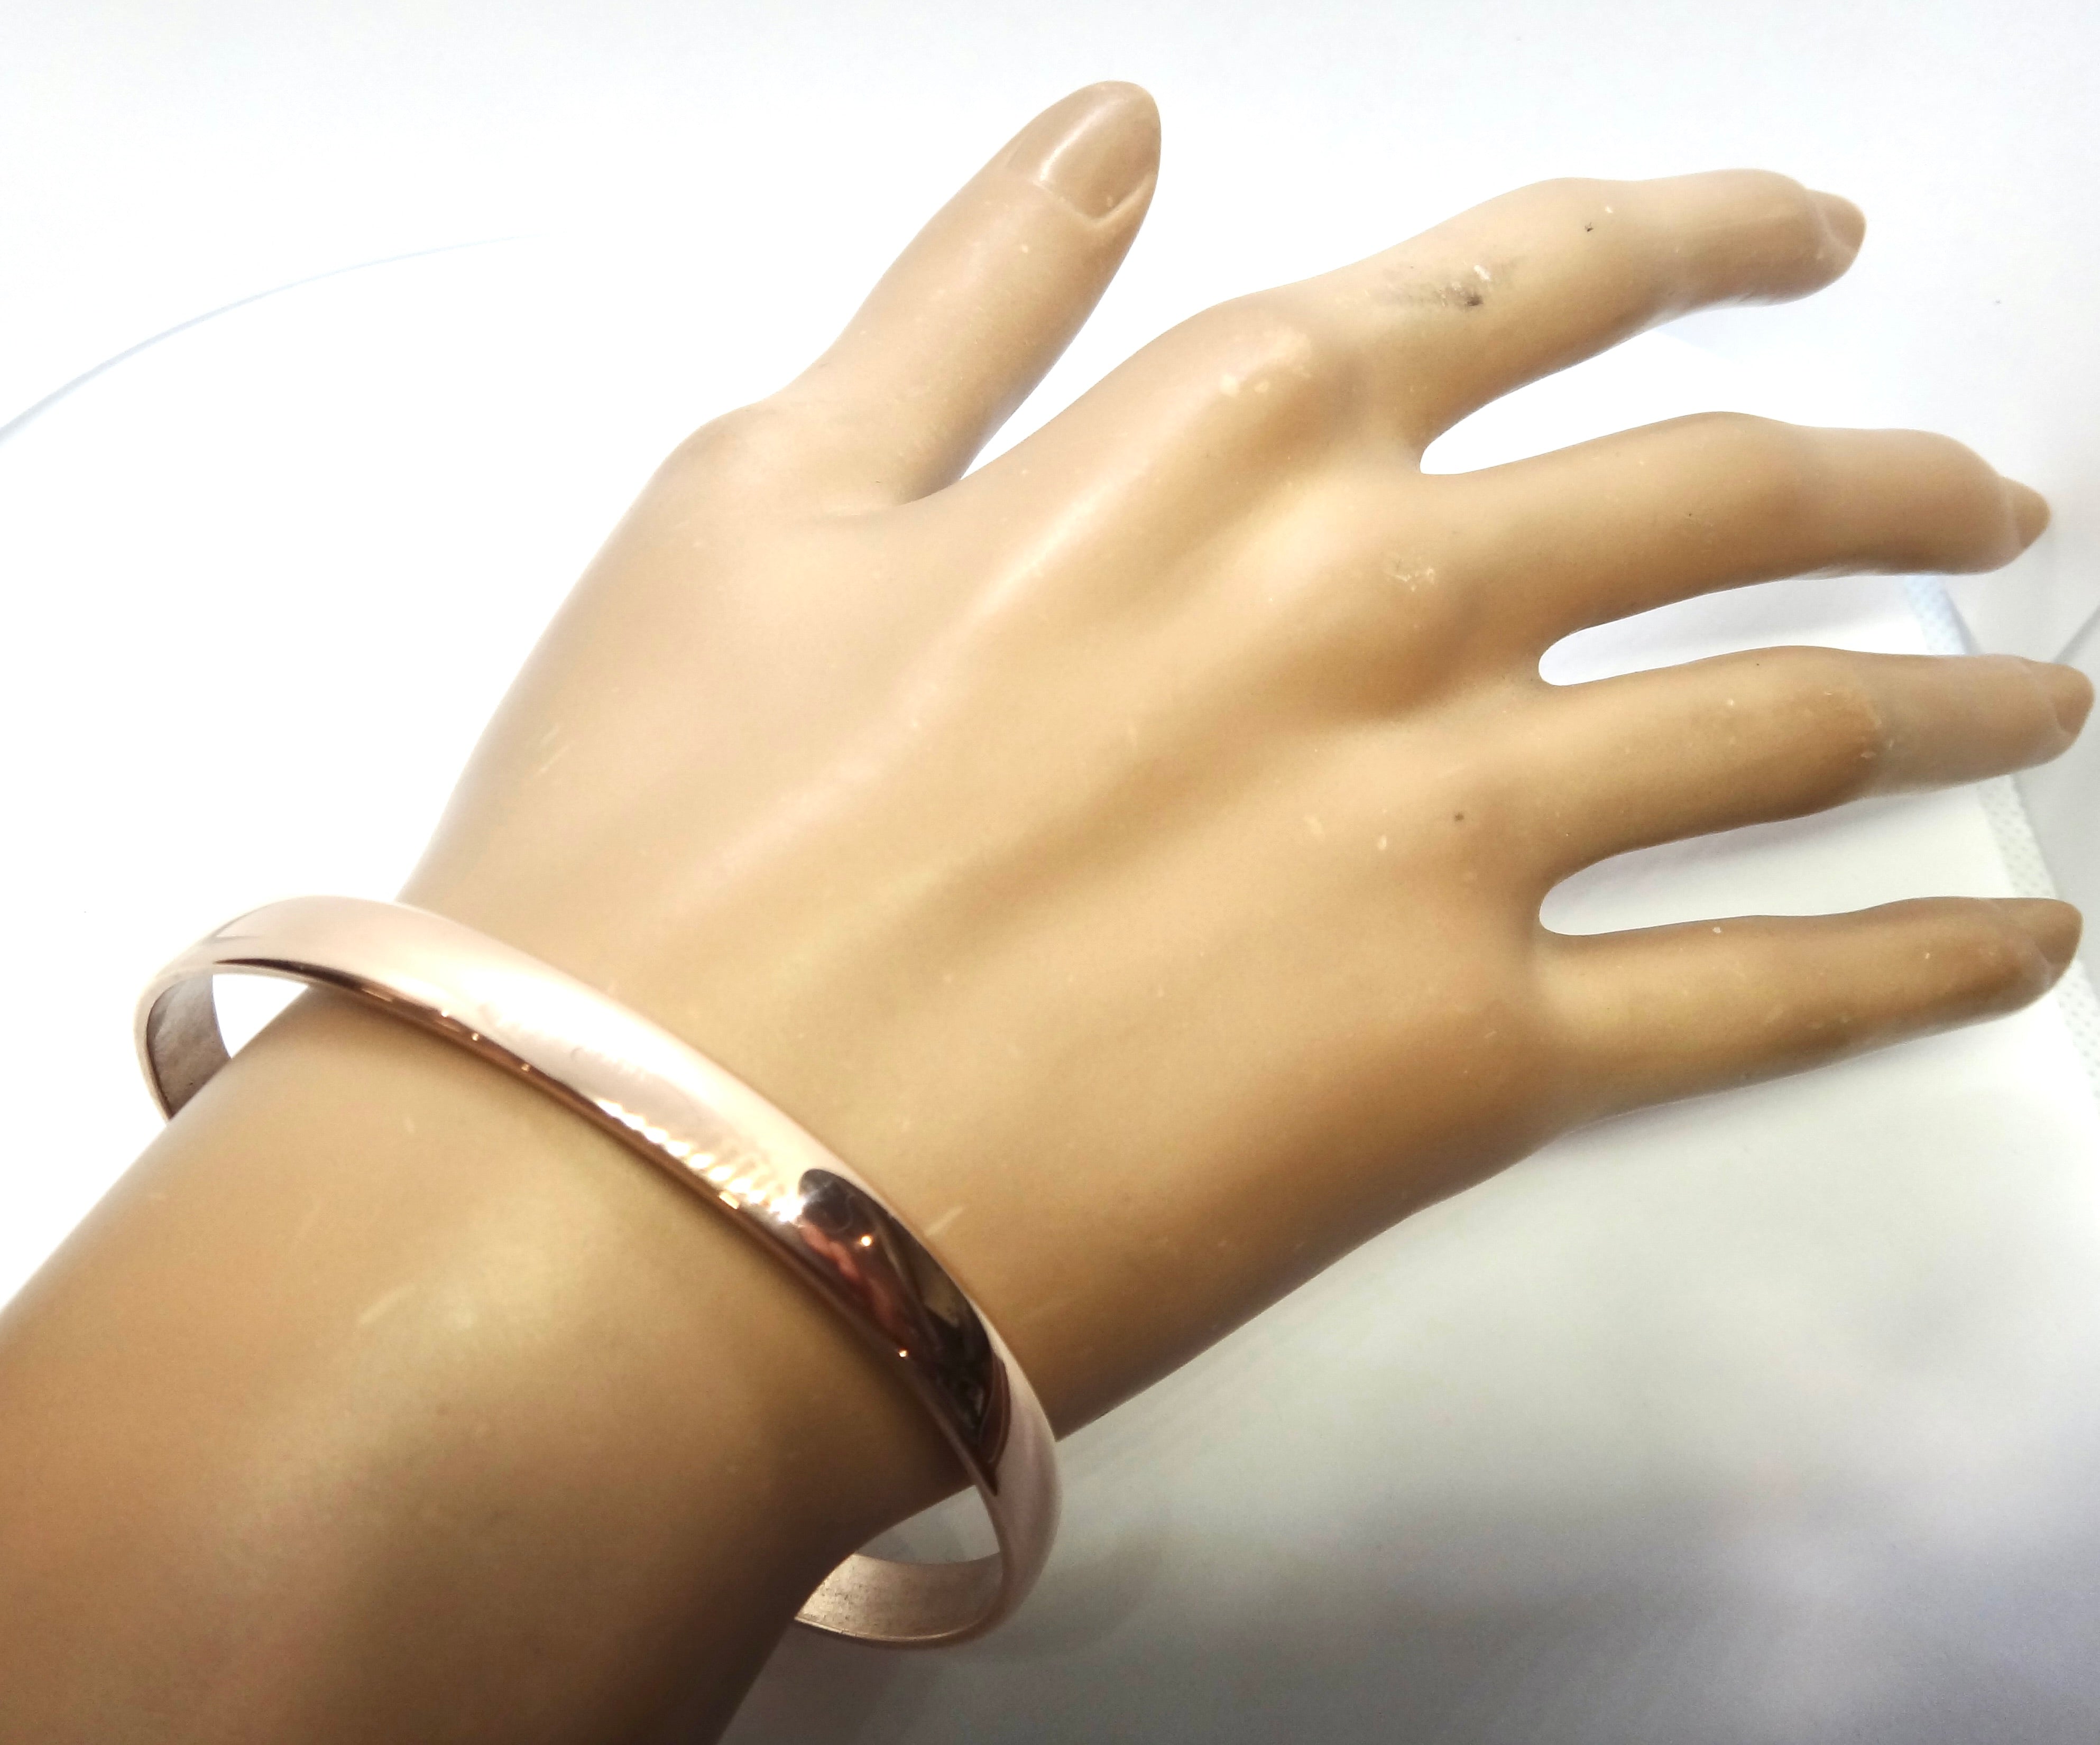 Solid 9ct ROSE Gold Half Rounded Bangle